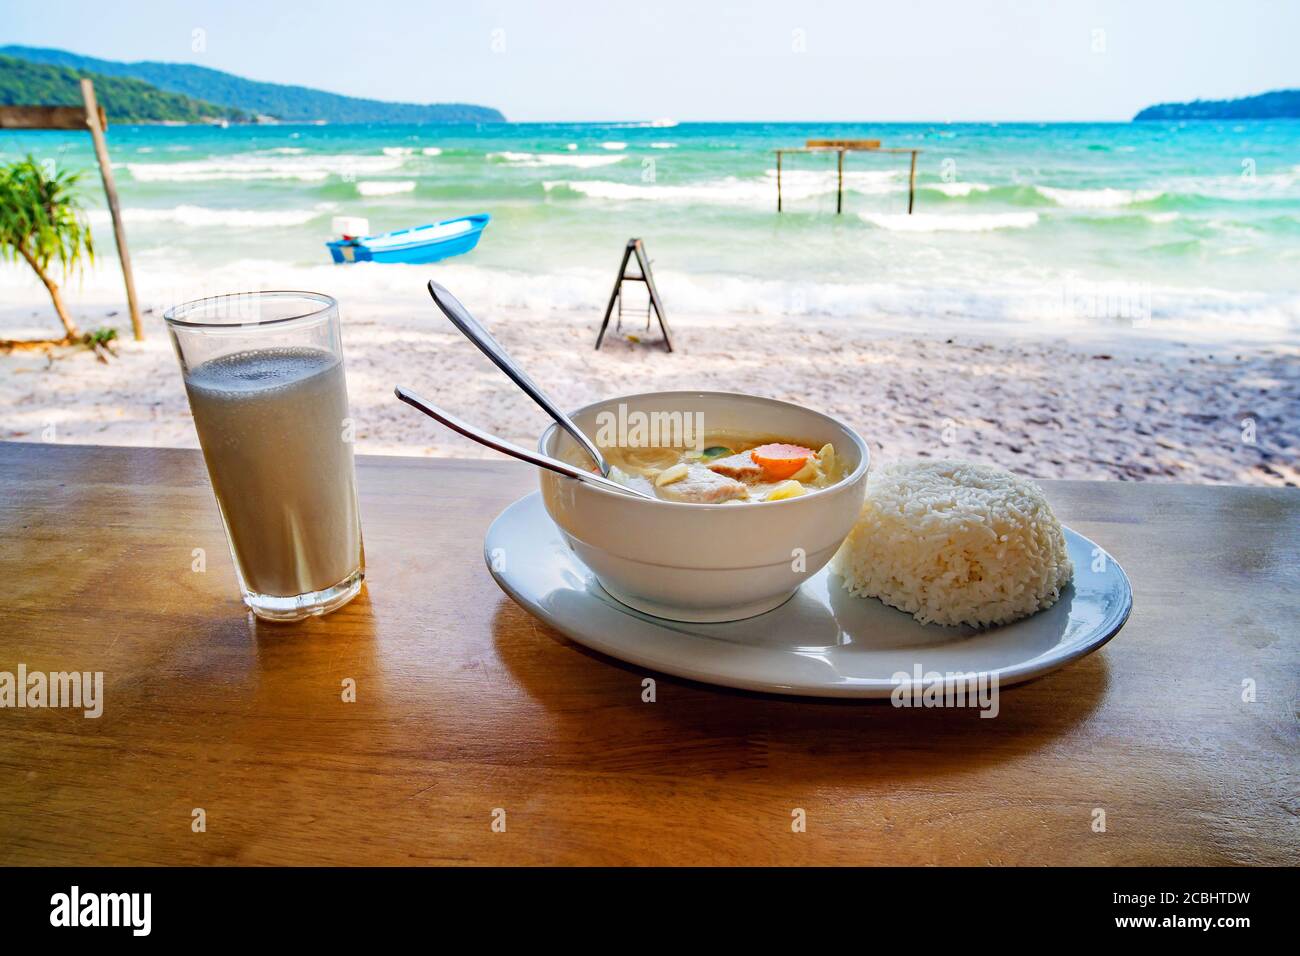 Thai cuisine. A plate of soup with coconut milk and boiled rice on the table against the beautiful sea landscape. Breakfast at the beach restaurant Stock Photo